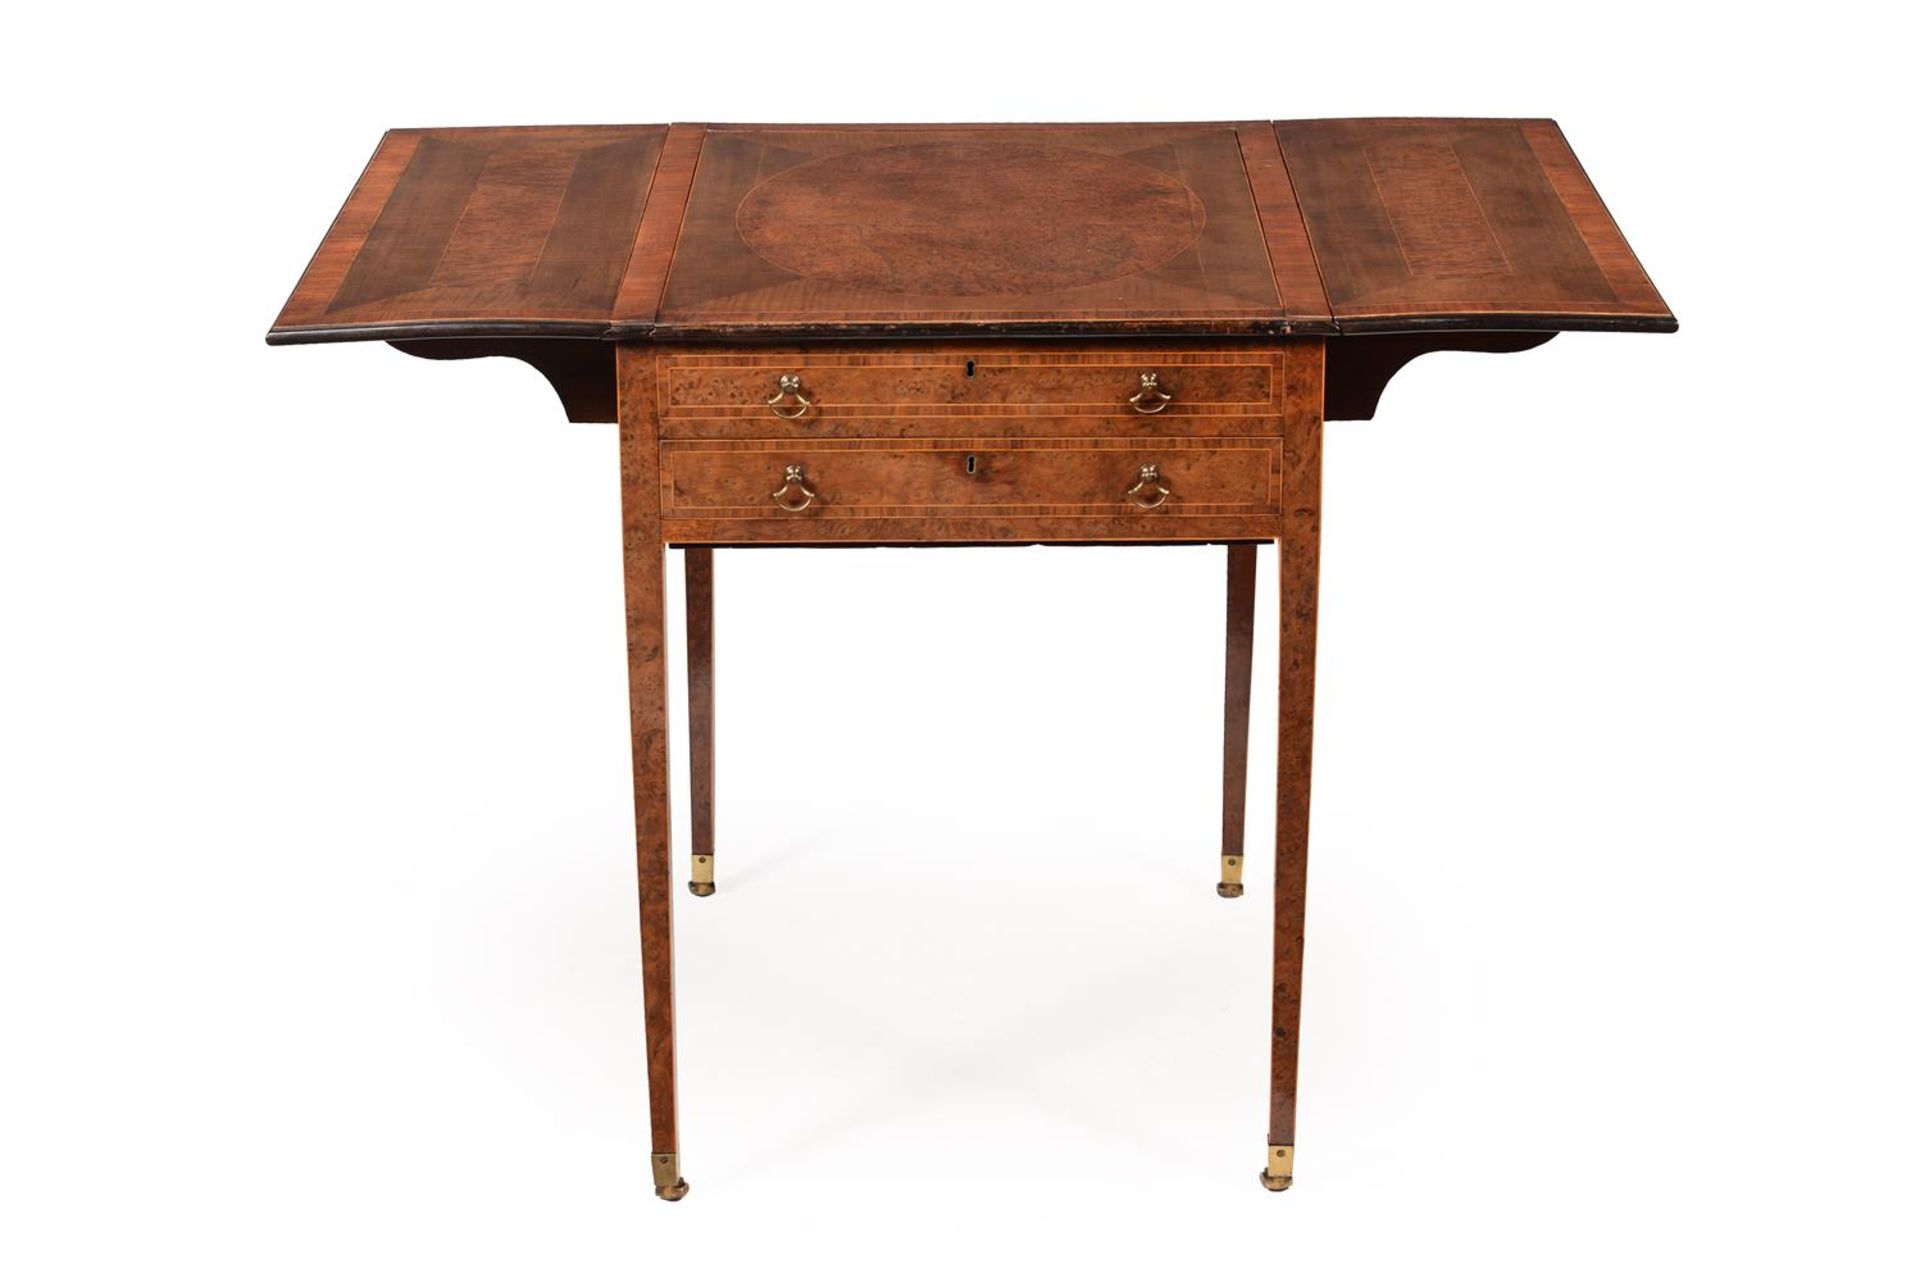 Y A GEORGE III BURR YEW AND HAREWOOD 'HARLEQUIN' PEMBROKE TABLE, ATTRIBUTED TO INCE & MAYHEW - Image 5 of 6